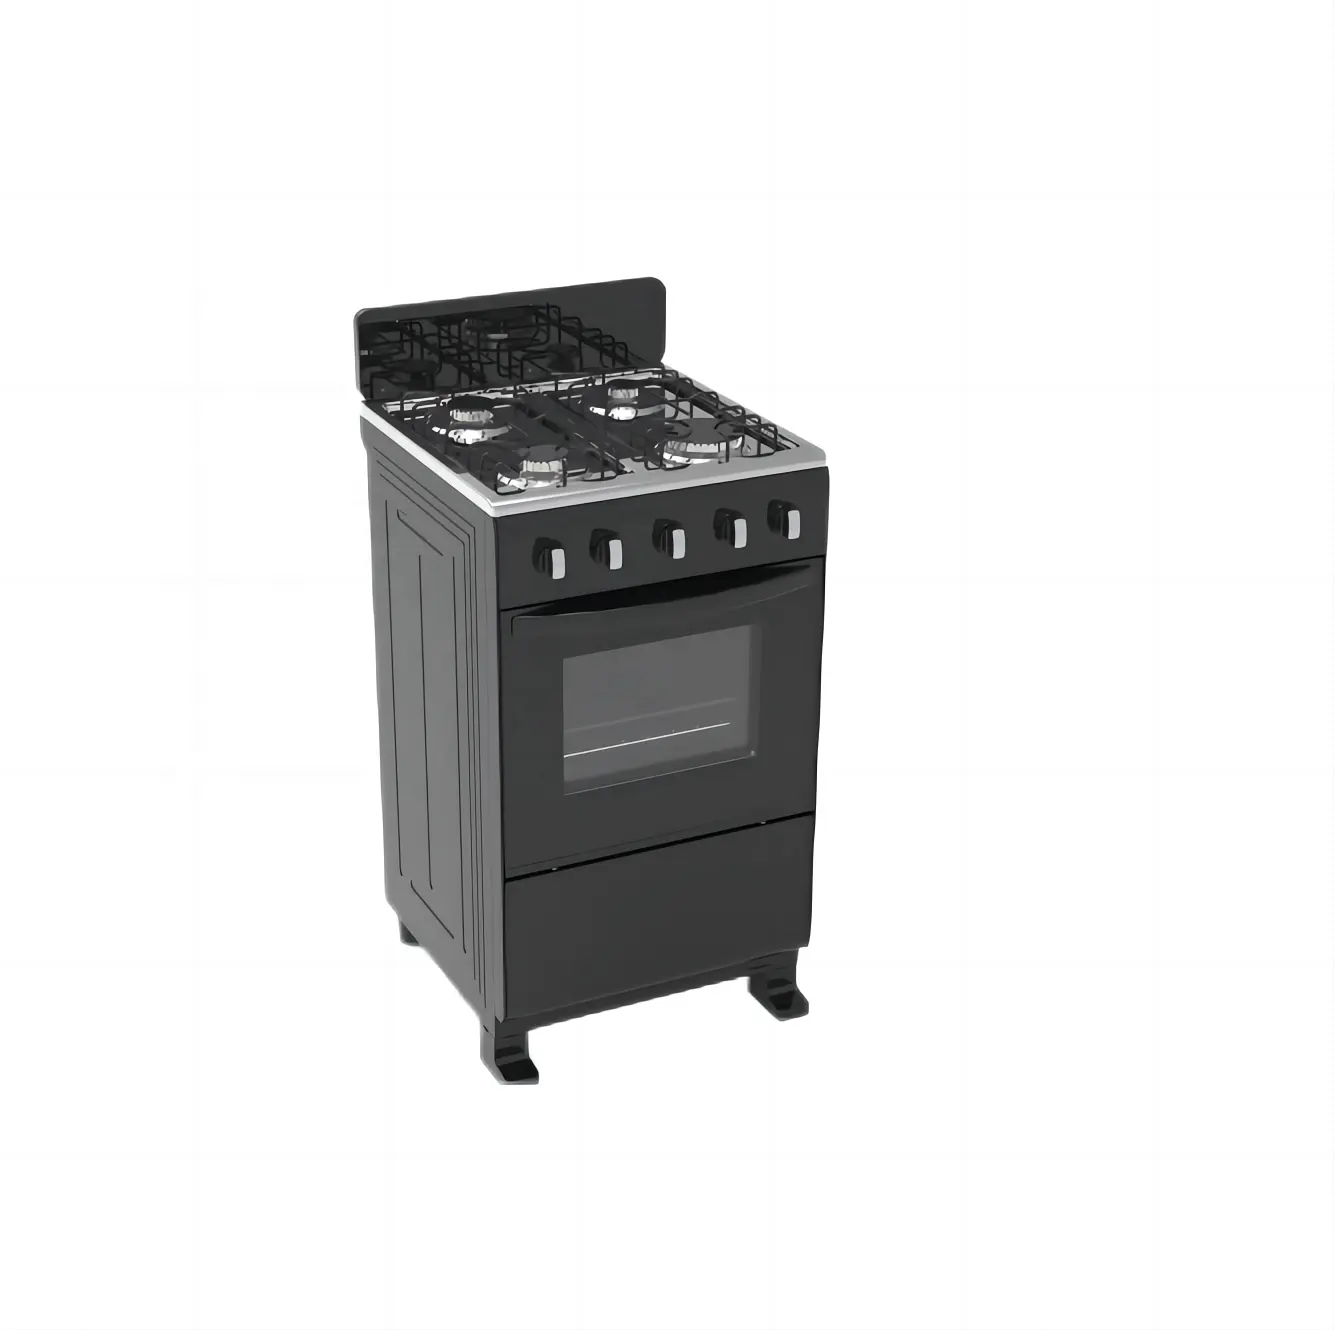 GAS OVEN FREE STANDING COOKING RANGE 4 BURNER GAS STOVE WITH OVEN